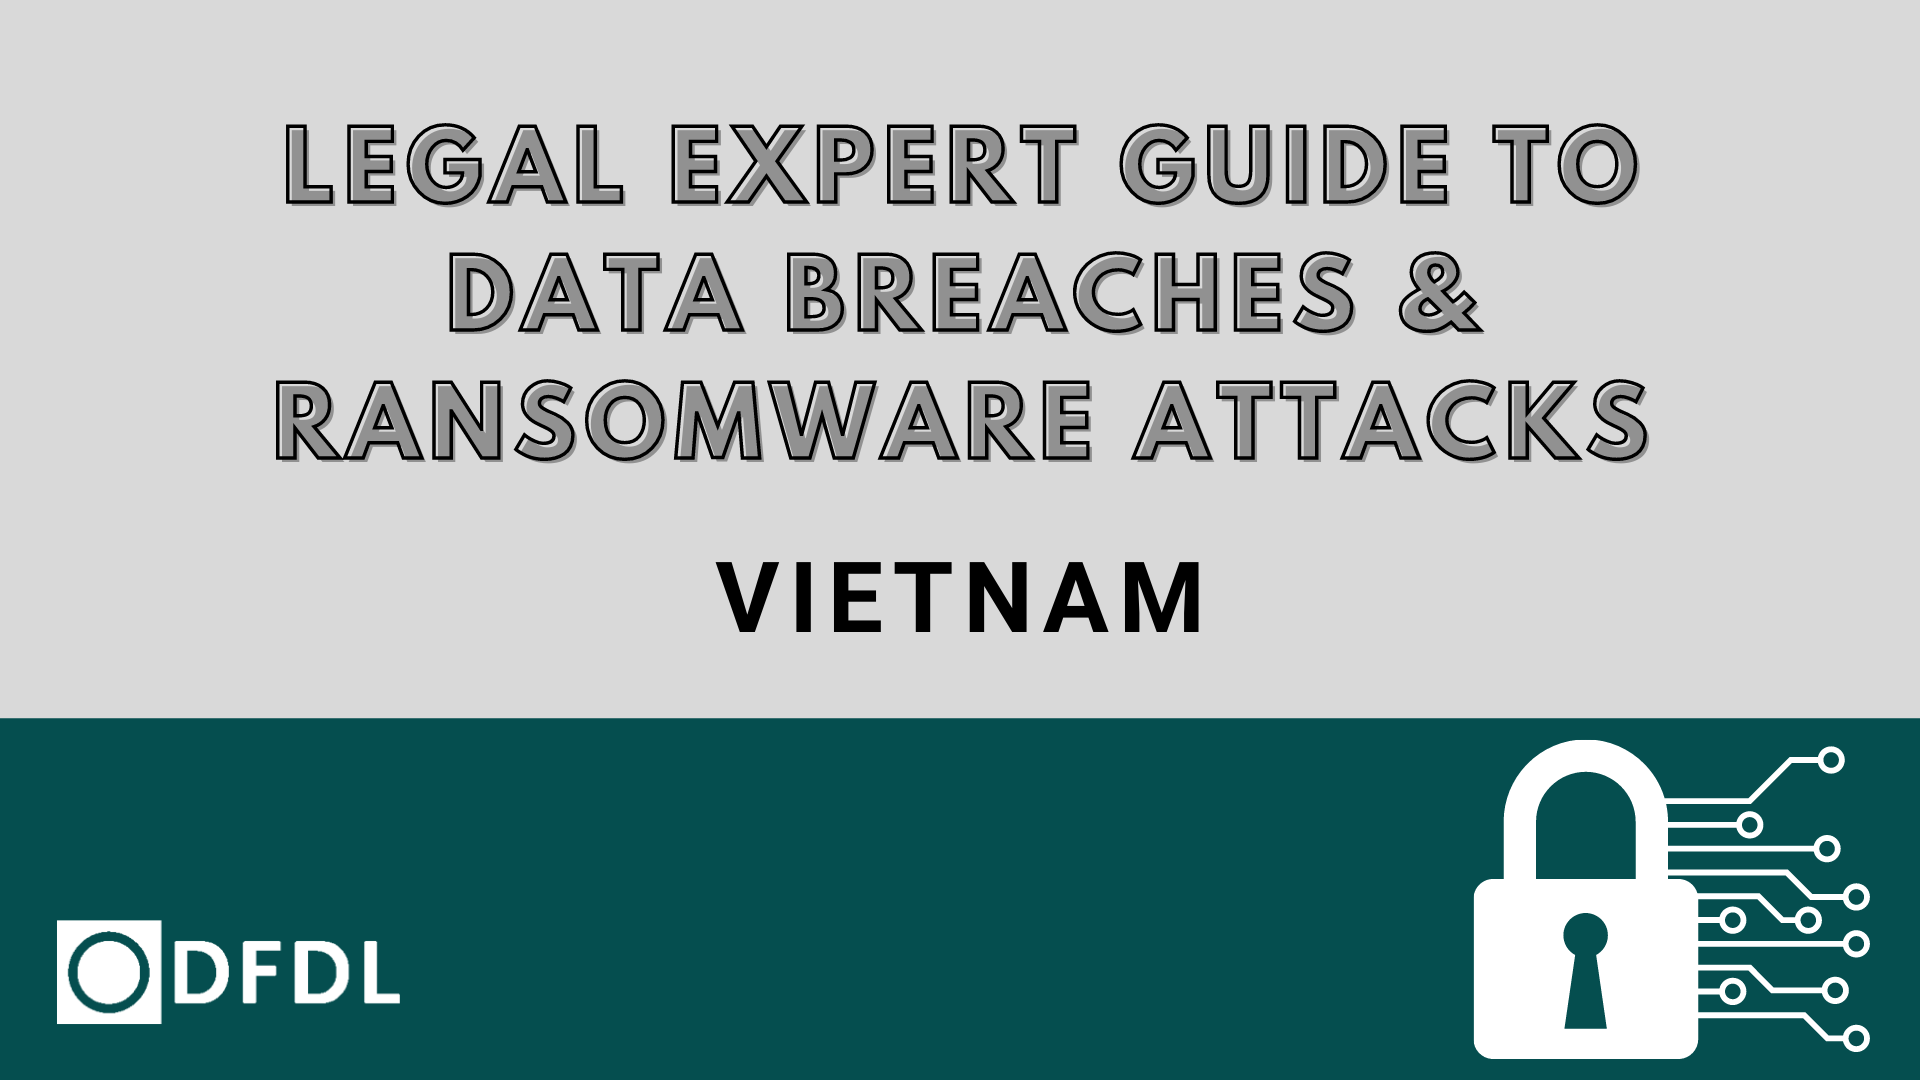 Legal Expert Guide to Data Breaches & Ransomware Attacks in Vietnam